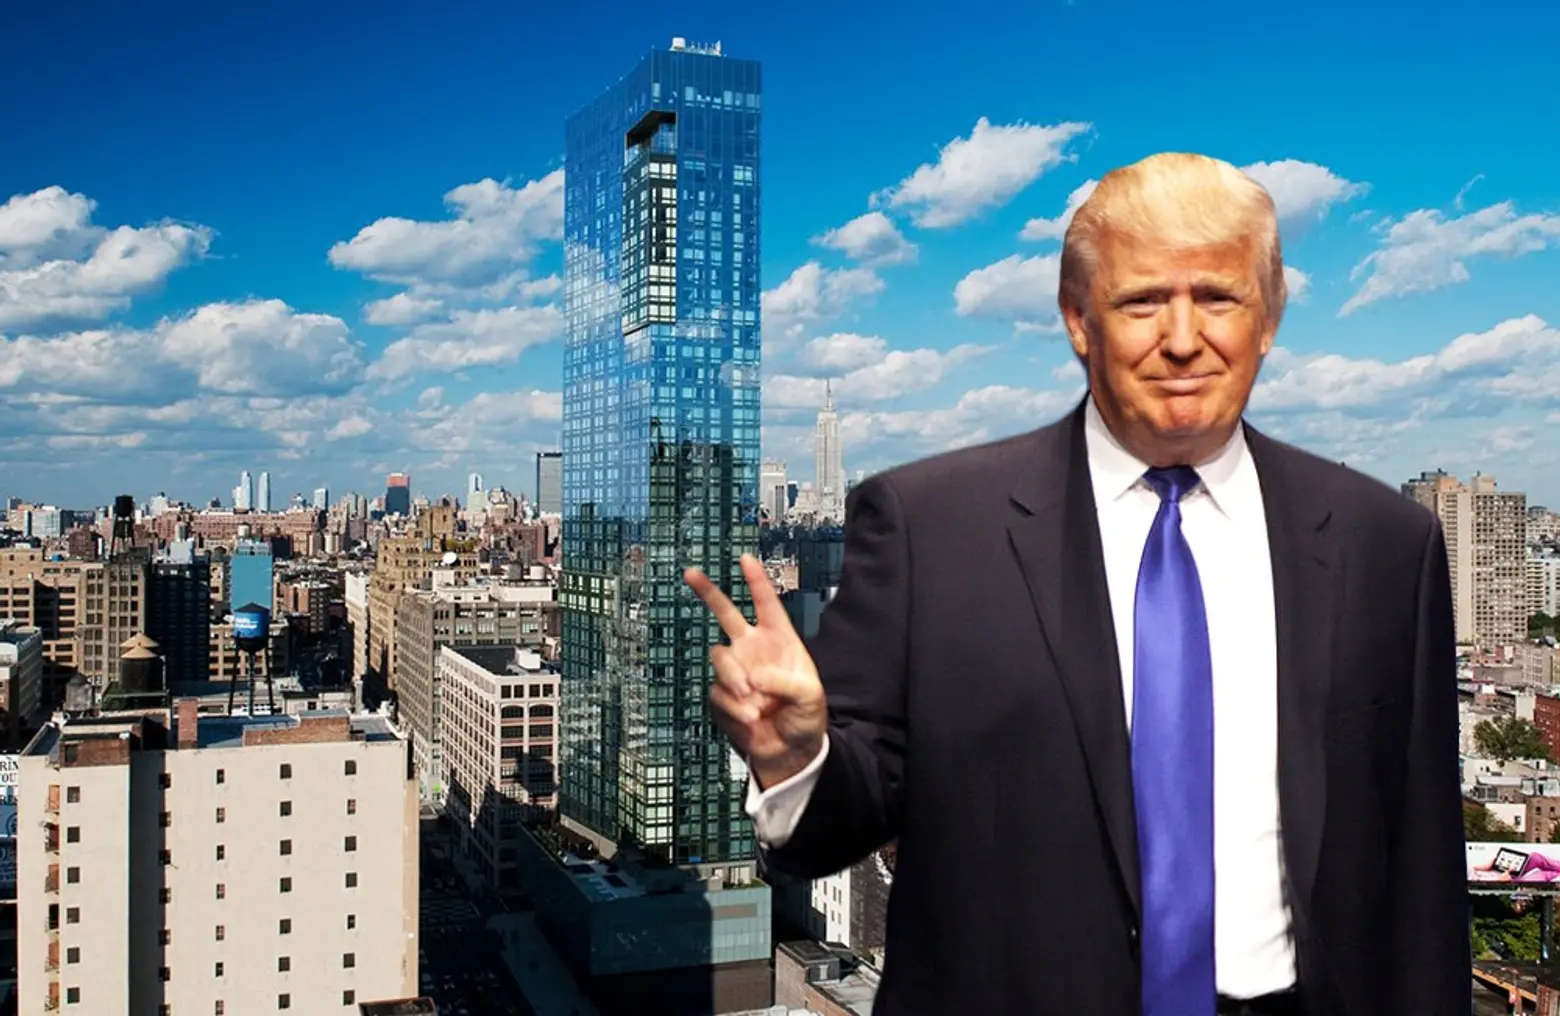 Trump’s Soho hotel experiences business boom after rebranding without the president’s name